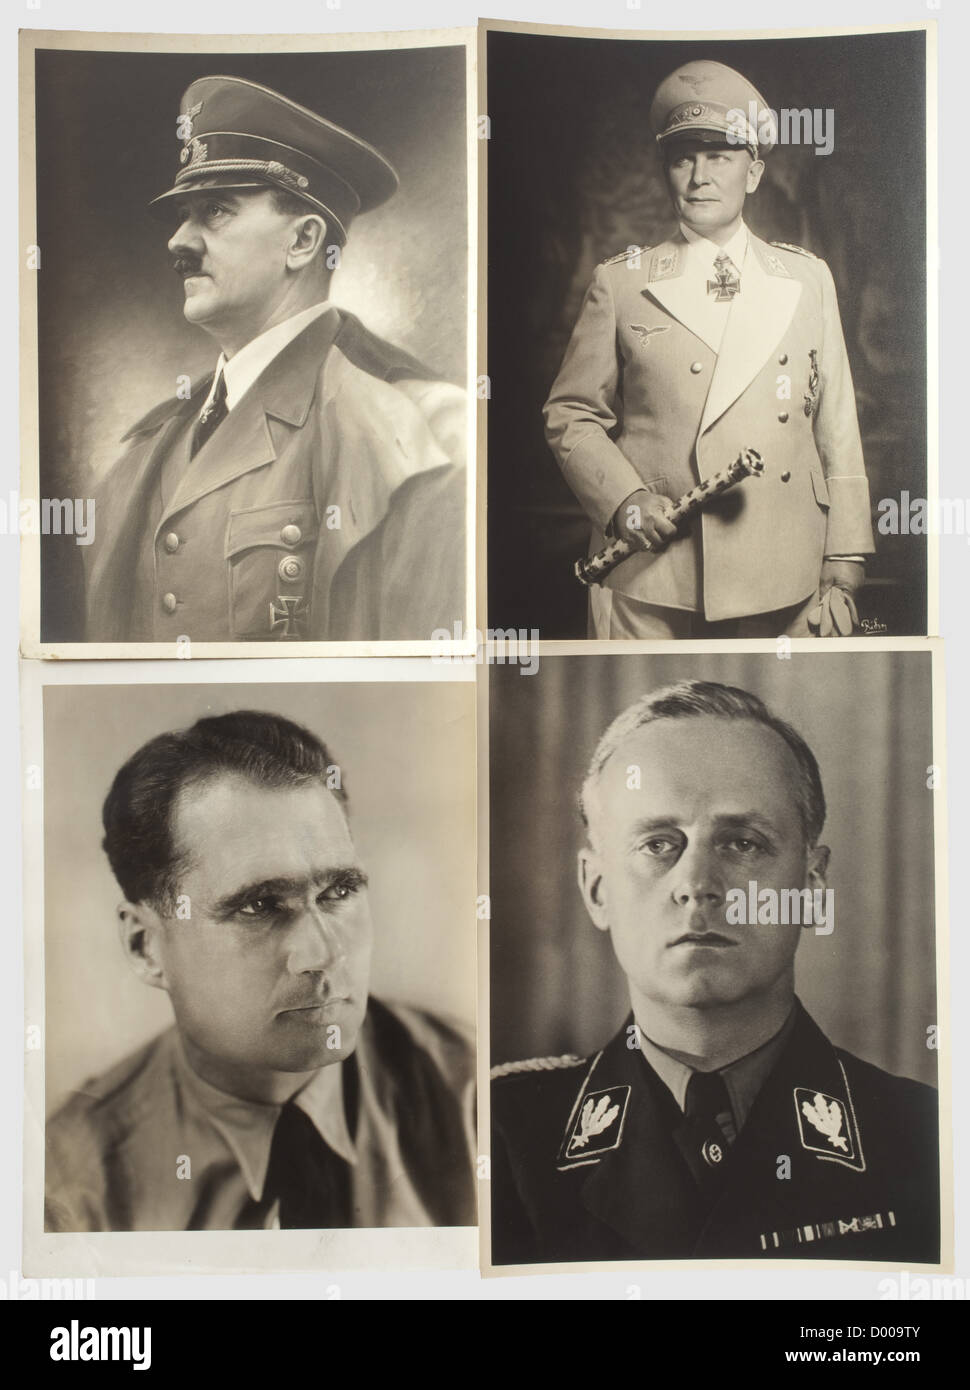 Collection of 36 large-size portrait photographs of leading members of the Nazi Party,Adolf Hitler: picture after a painting(24 x 17.5). Hermann Göring: 18 pictures in various sizes(2 in 40 x 30,5 in 30 x 24,7 in 24 x 18,1 in 21.5 x 16.5,3 in 18 x 13),mostly taken by Röhr or Hoffmann,also one early photo in hunting attire,as Reichsmarschall,in uniform as Reichsjägermeister(three pictures by Röhr),in SA uniform with PLM,partially stamped or identical copies. Rudolf Heß: a portra historic,historical,people,1930s,1930s,20th century,NS,National,Additional-Rights-Clearences-Not Available Stock Photo